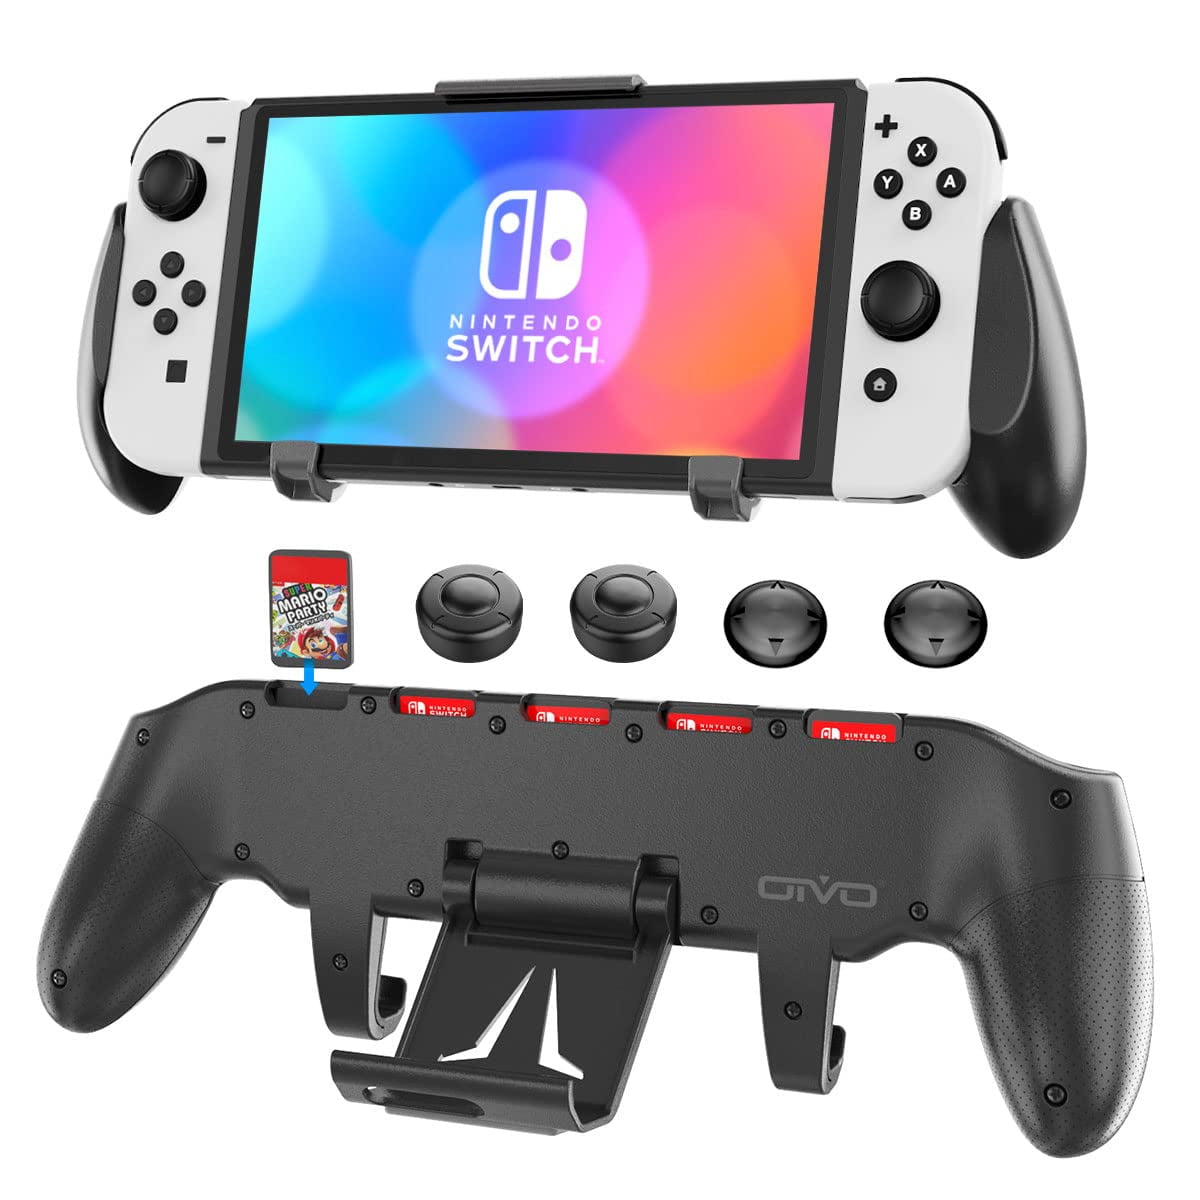 OIVO Switch Grip 5 Game Slots for Nintendo Switch & OLED Joy-Con, Asymmetrical Grip Adjustable Stand and 4 Thump Caps, Black - Walmart.com